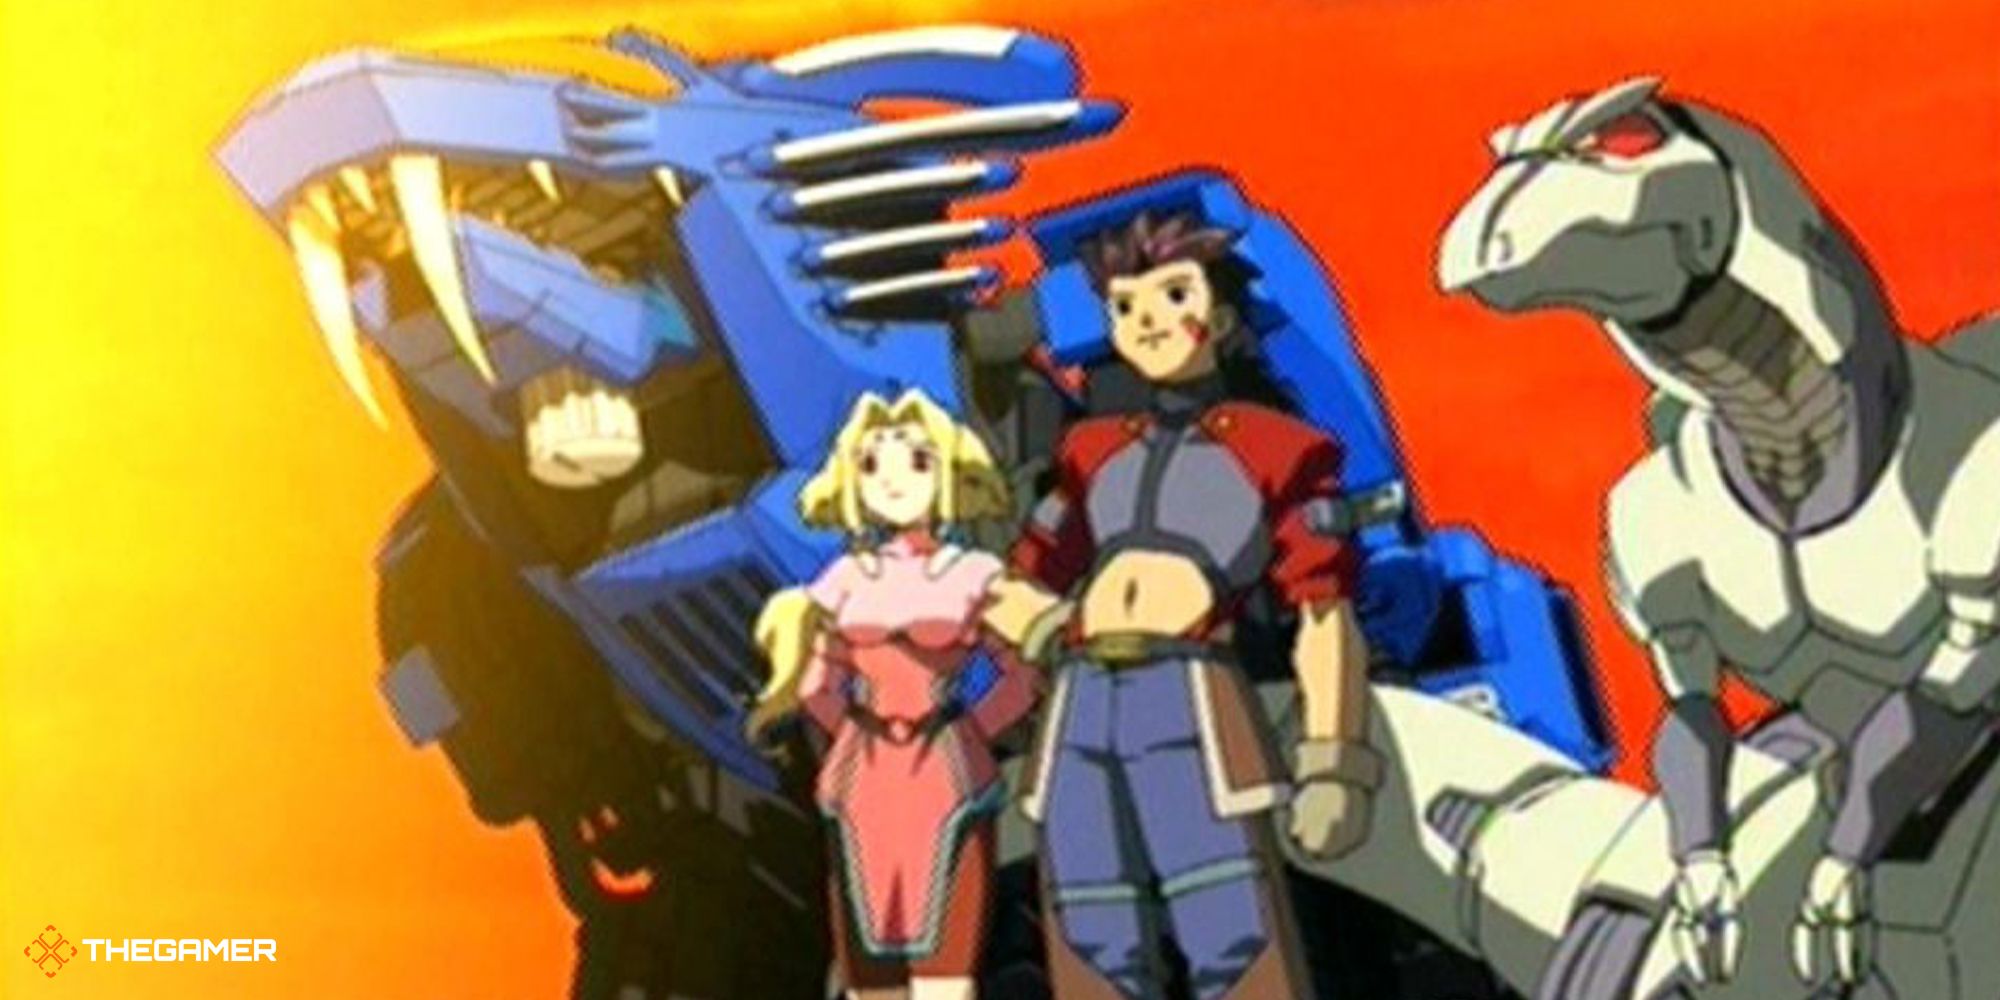 Mobile wallpaper: Zoids, Anime, 241821 download the picture for free.